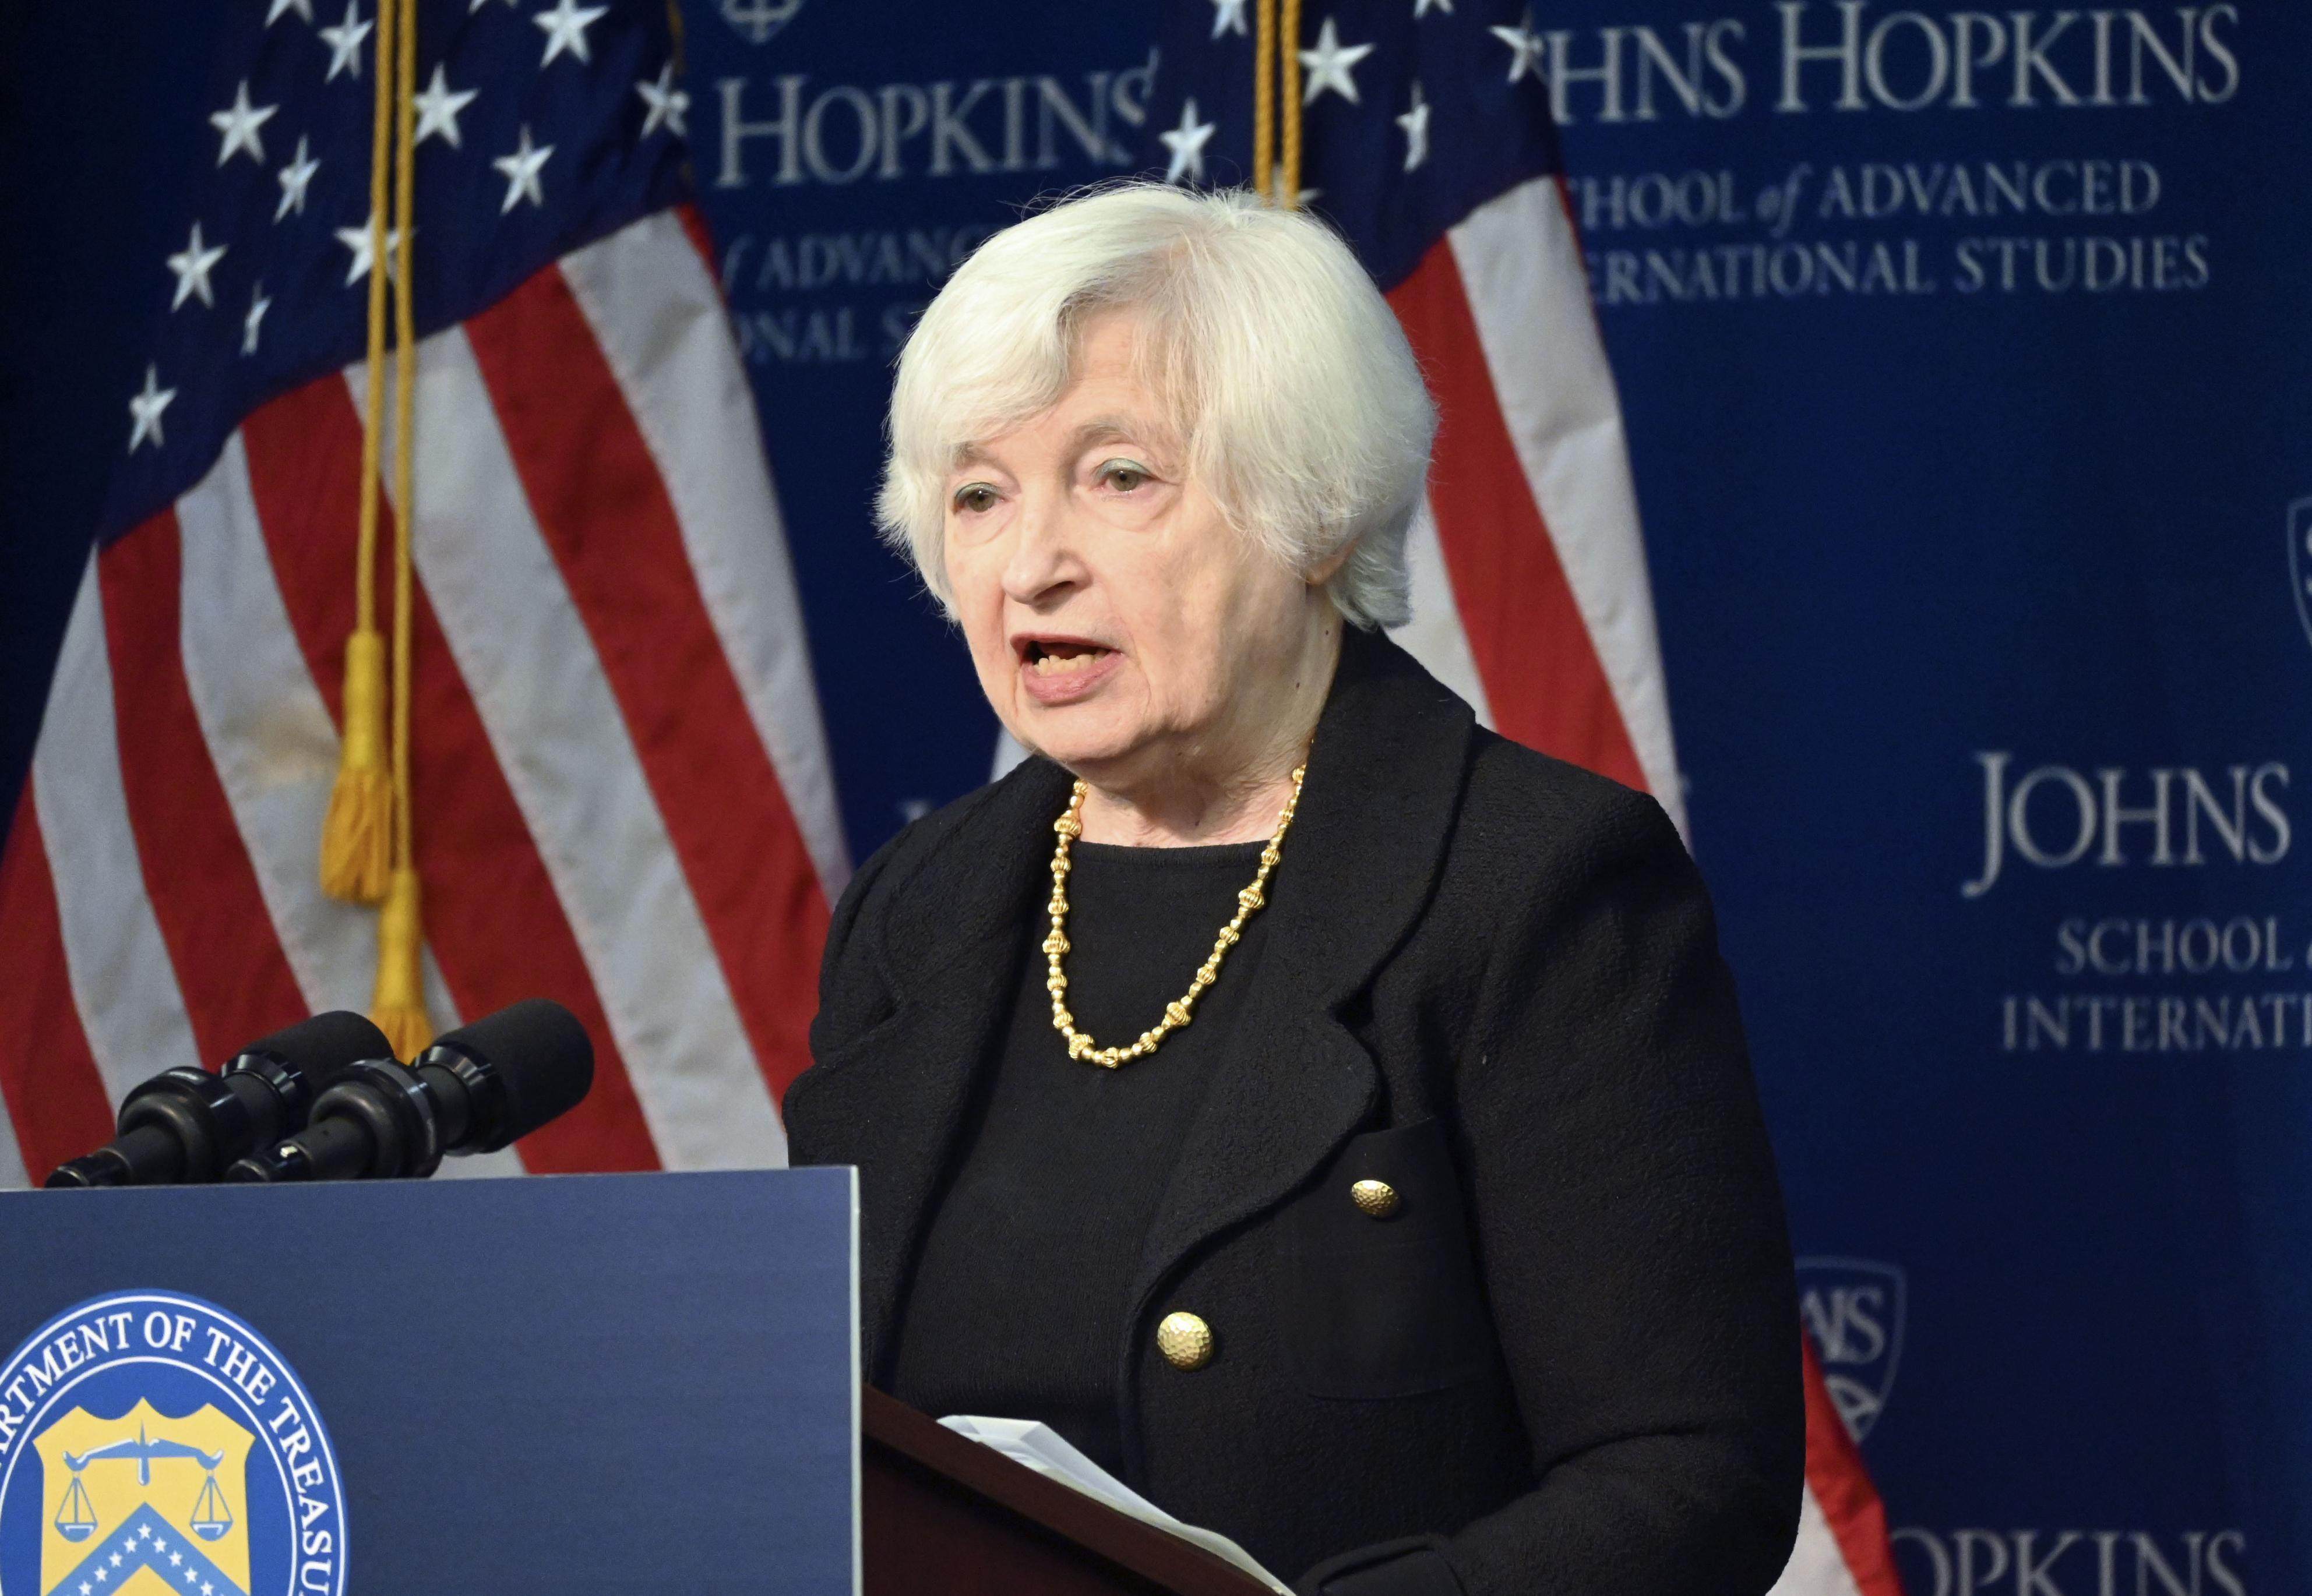 US Treasury Secretary Janet Yellen gives a speech on the US-China relationship at the Johns Hopkins University School of Advanced International Studies in Washington on April 20. The US’ chronic shortfall of domestic savings will exacerbate the economic consequences of its conflict with China. Photo: Kyodo